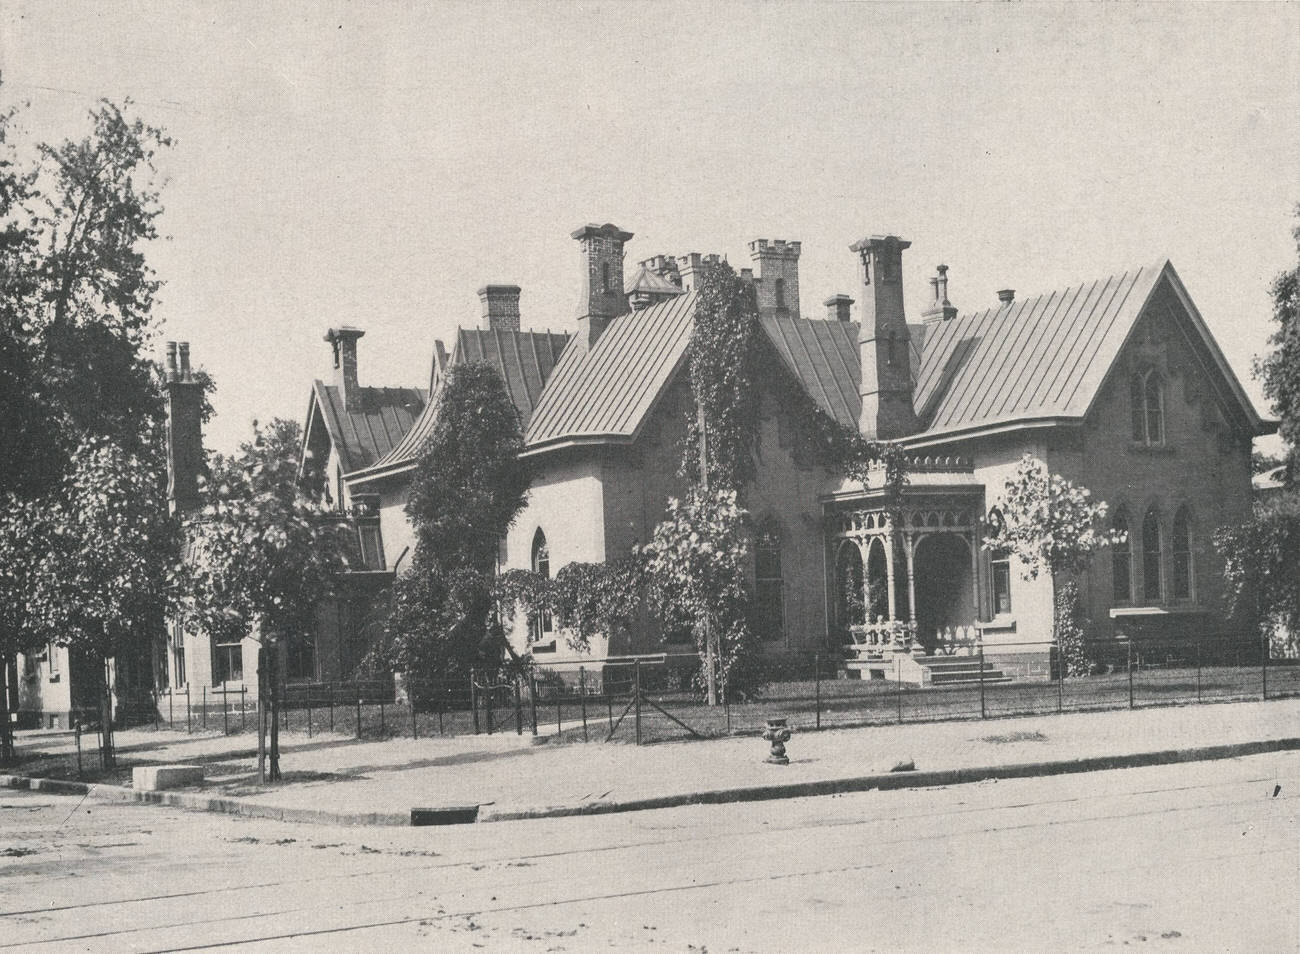 Charles H. Hayden house, Secretary and Treasurer of P. Hayden Saddlery Hardware Company, built by Dr. Francis Carter in 1842, later Knights of Columbus, no longer stands, 1909